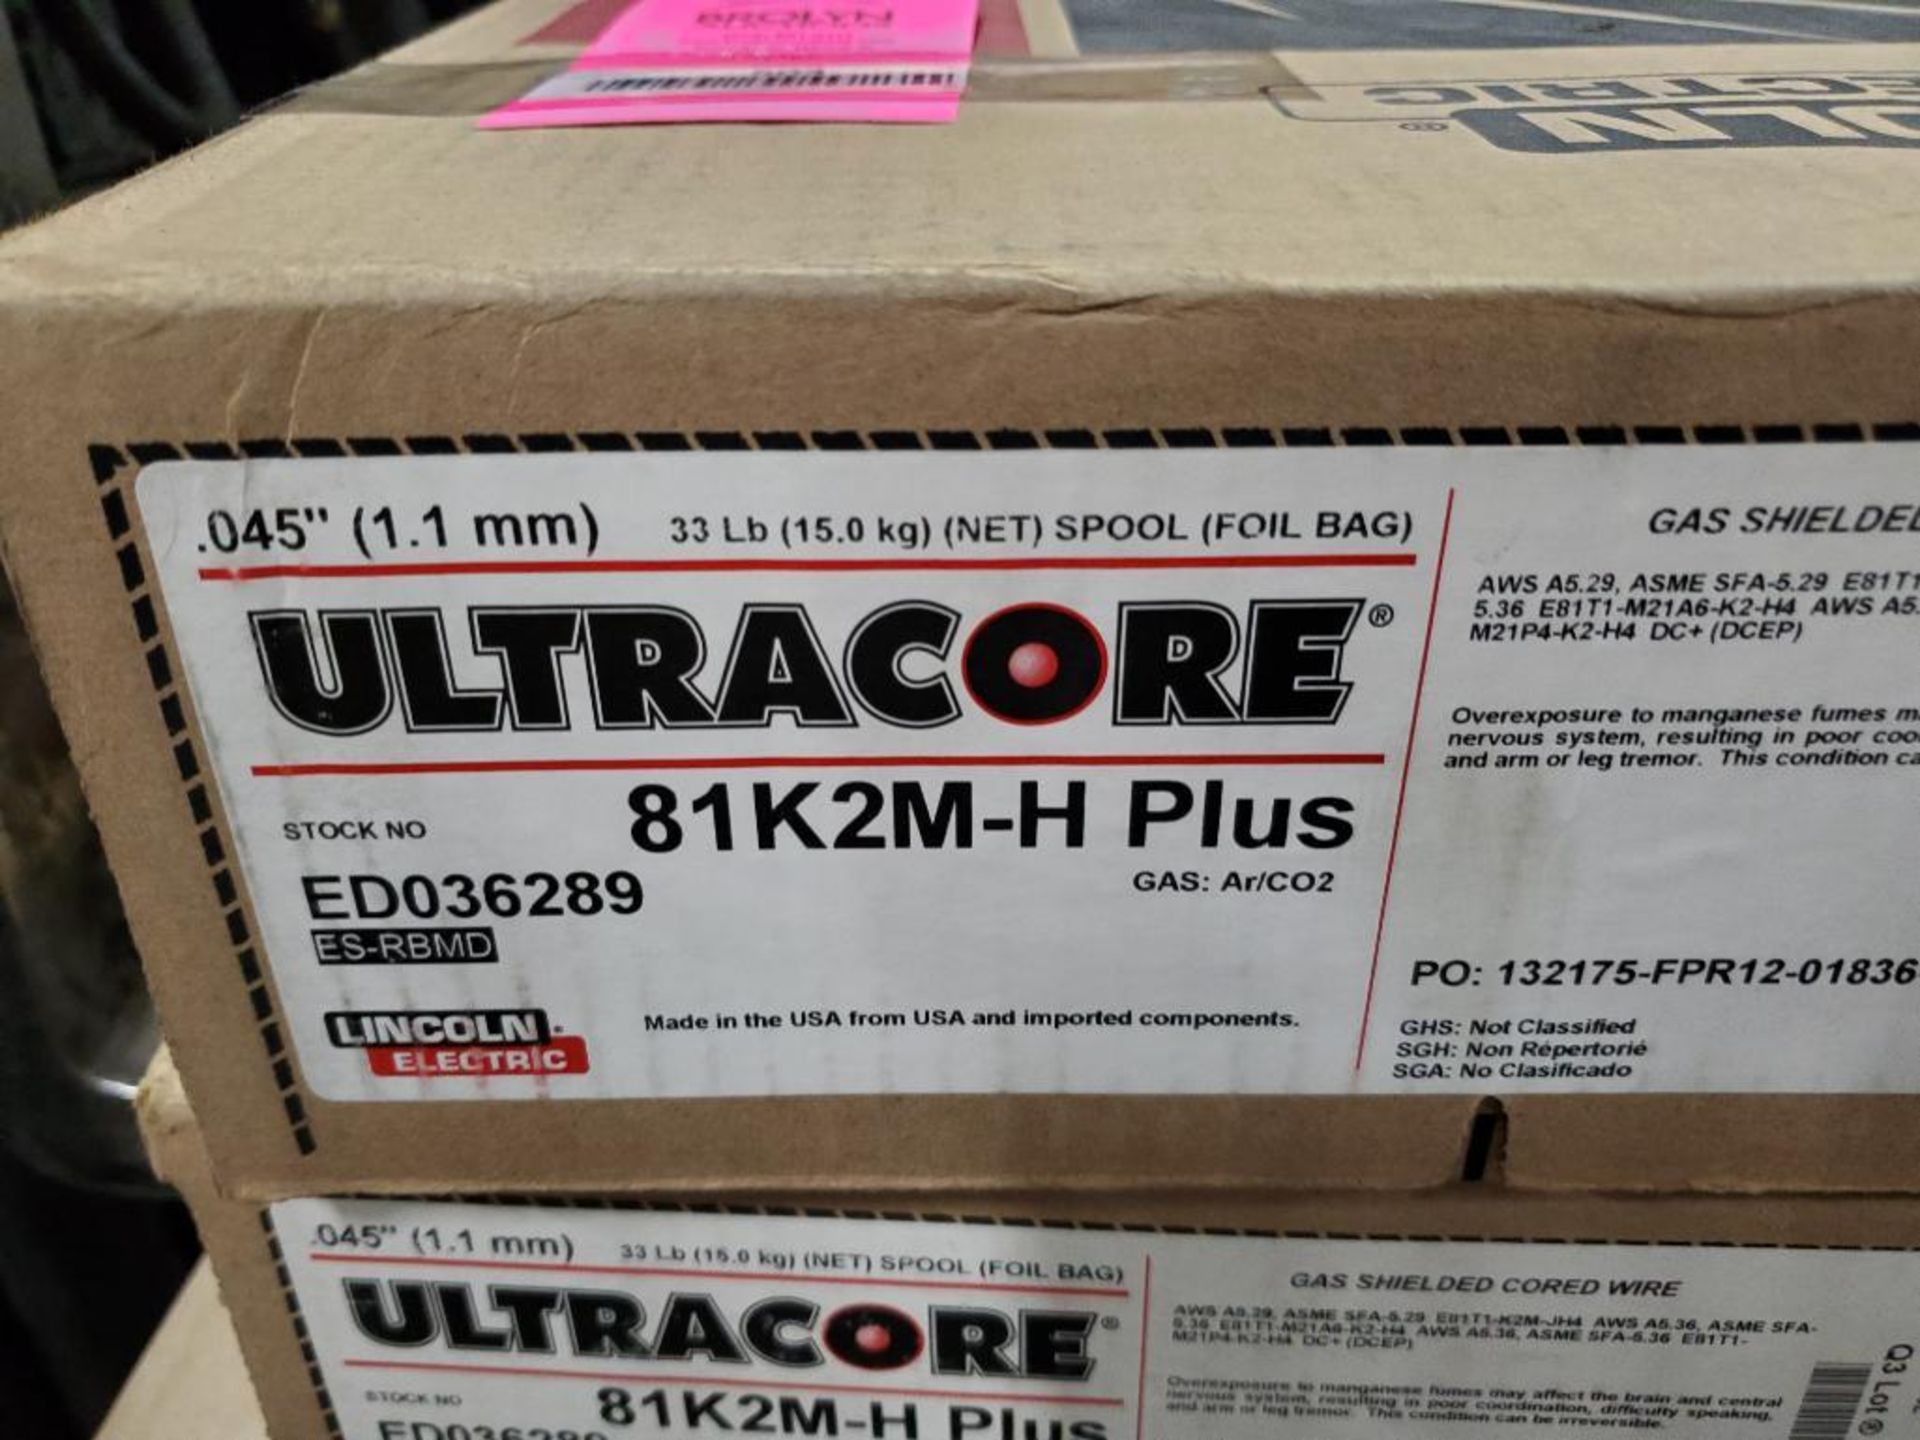 Qty 2 - Lincoln Electric Ultracore 81K2M-H Plus .045", 33LB gas shielded cored wire. - Image 2 of 4